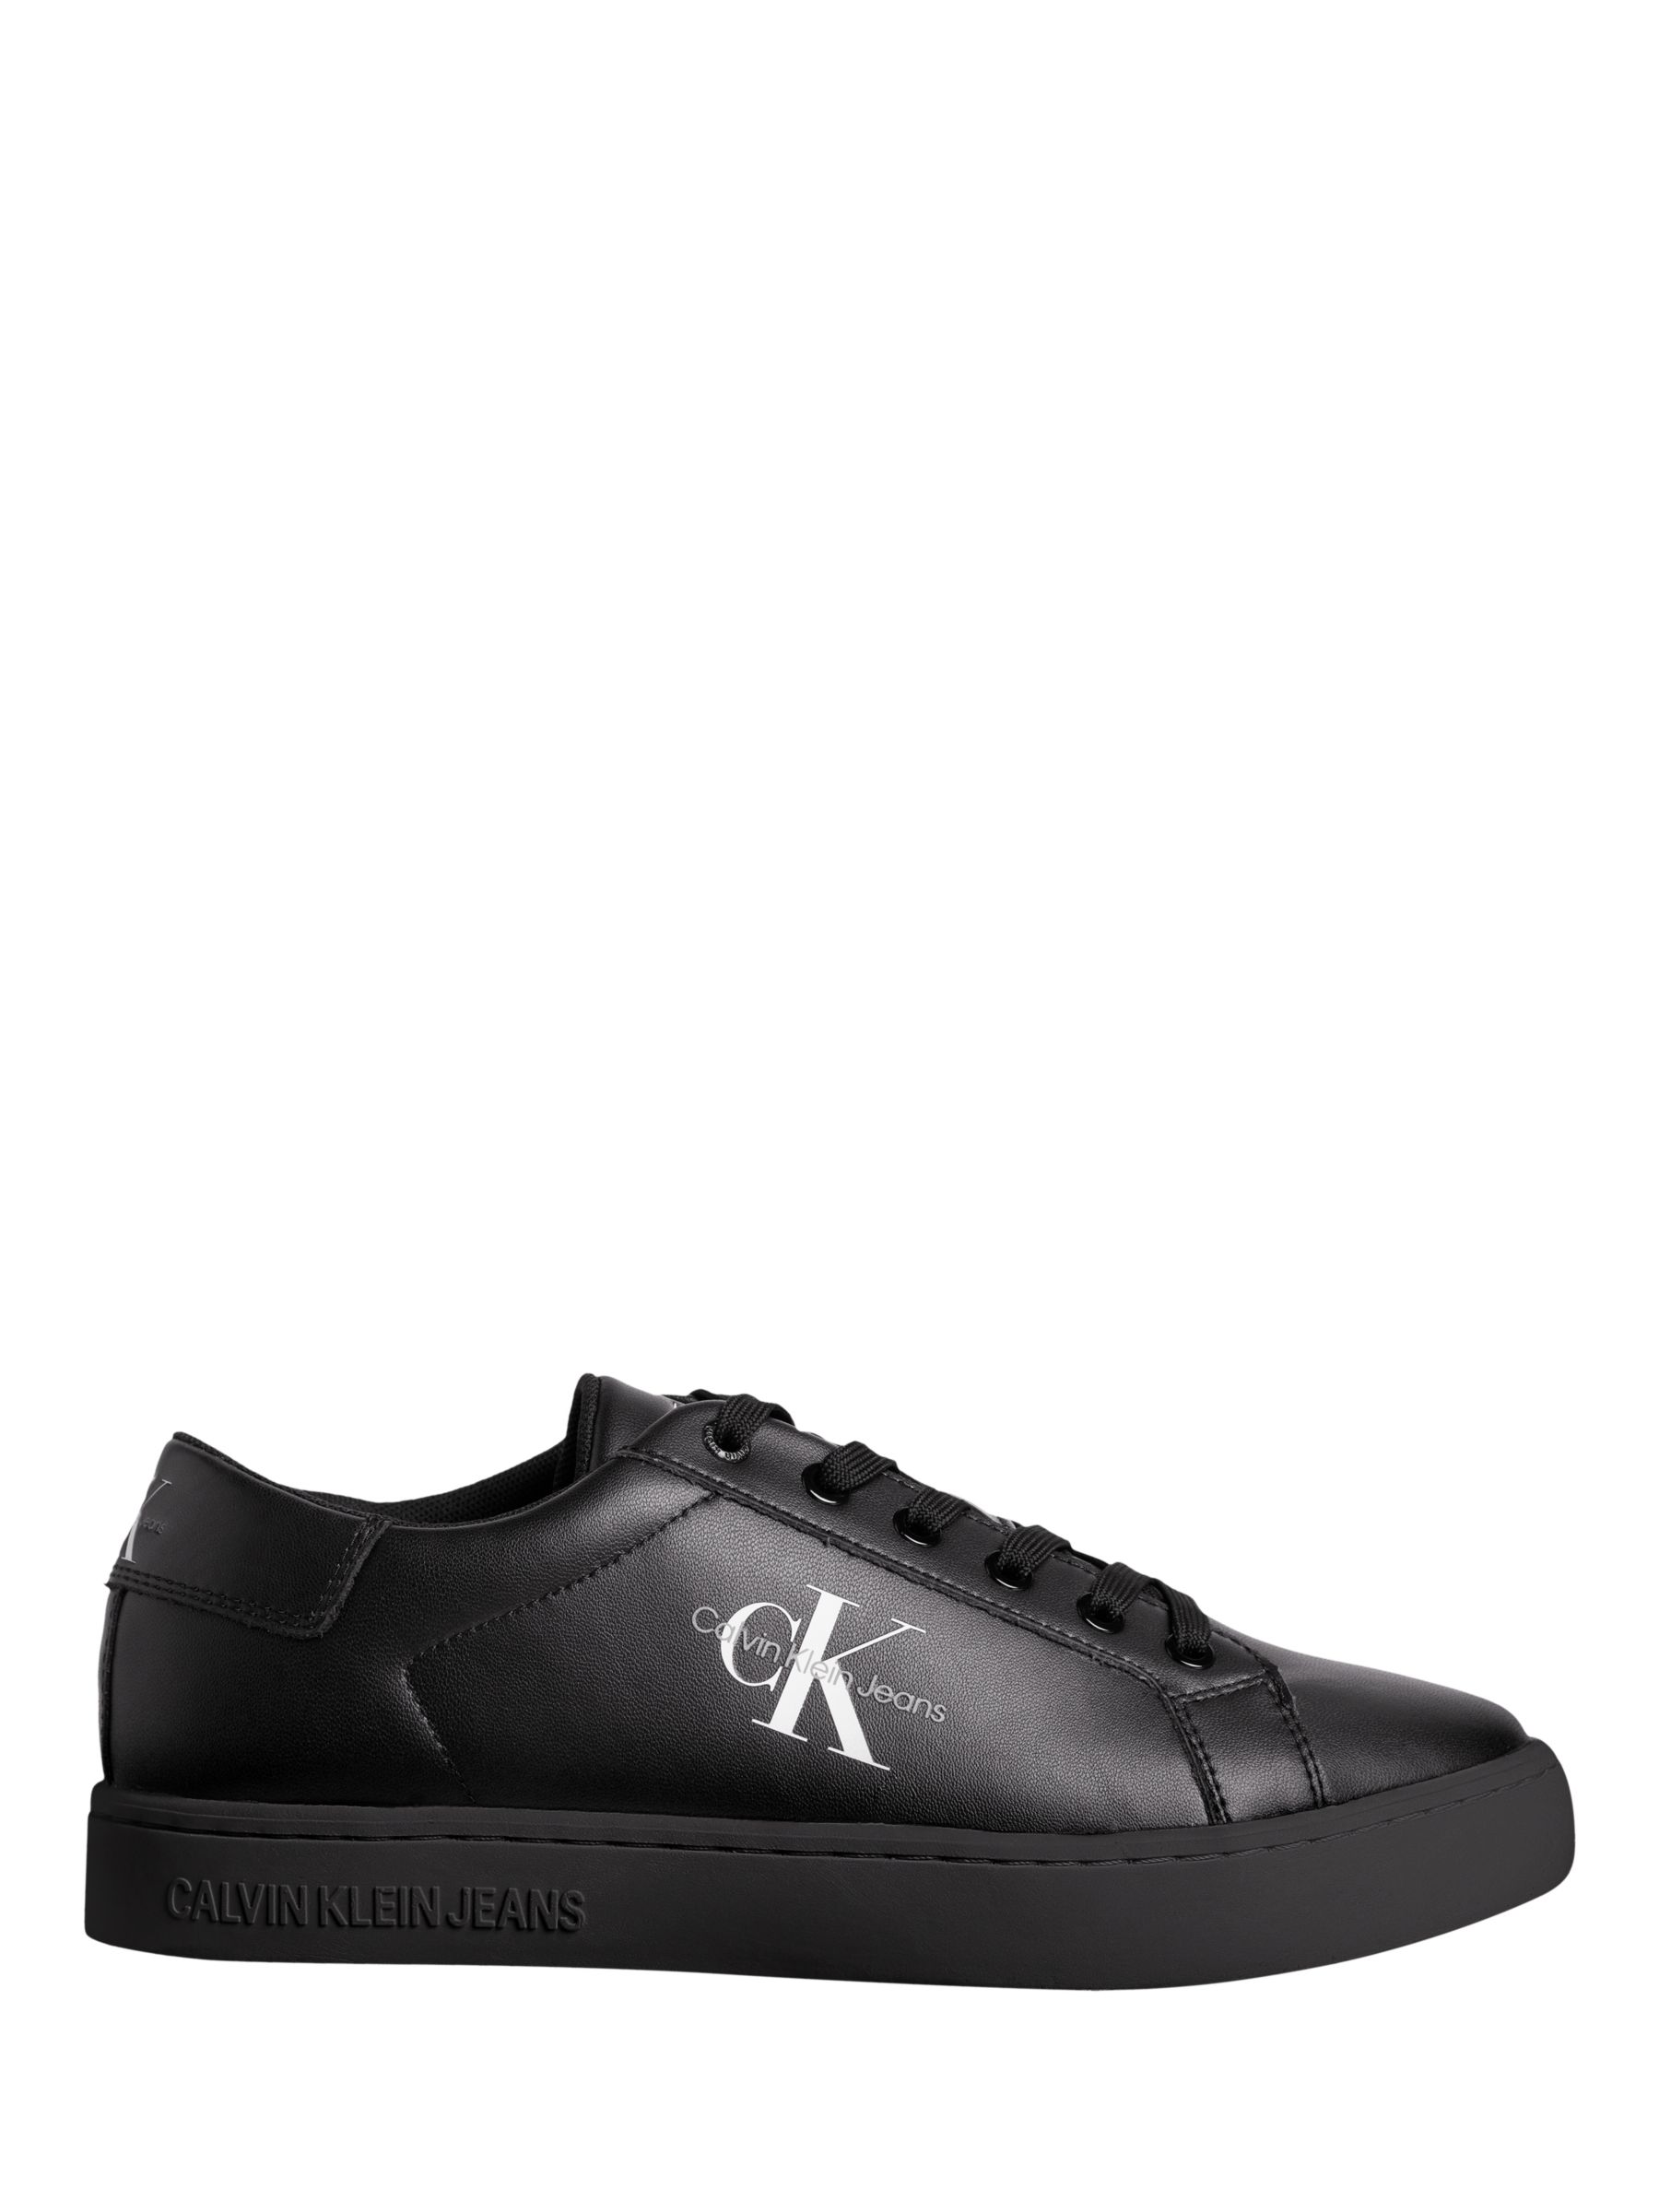 Calvin Klein Classic Cupsole Trainers, Black at John Lewis & Partners